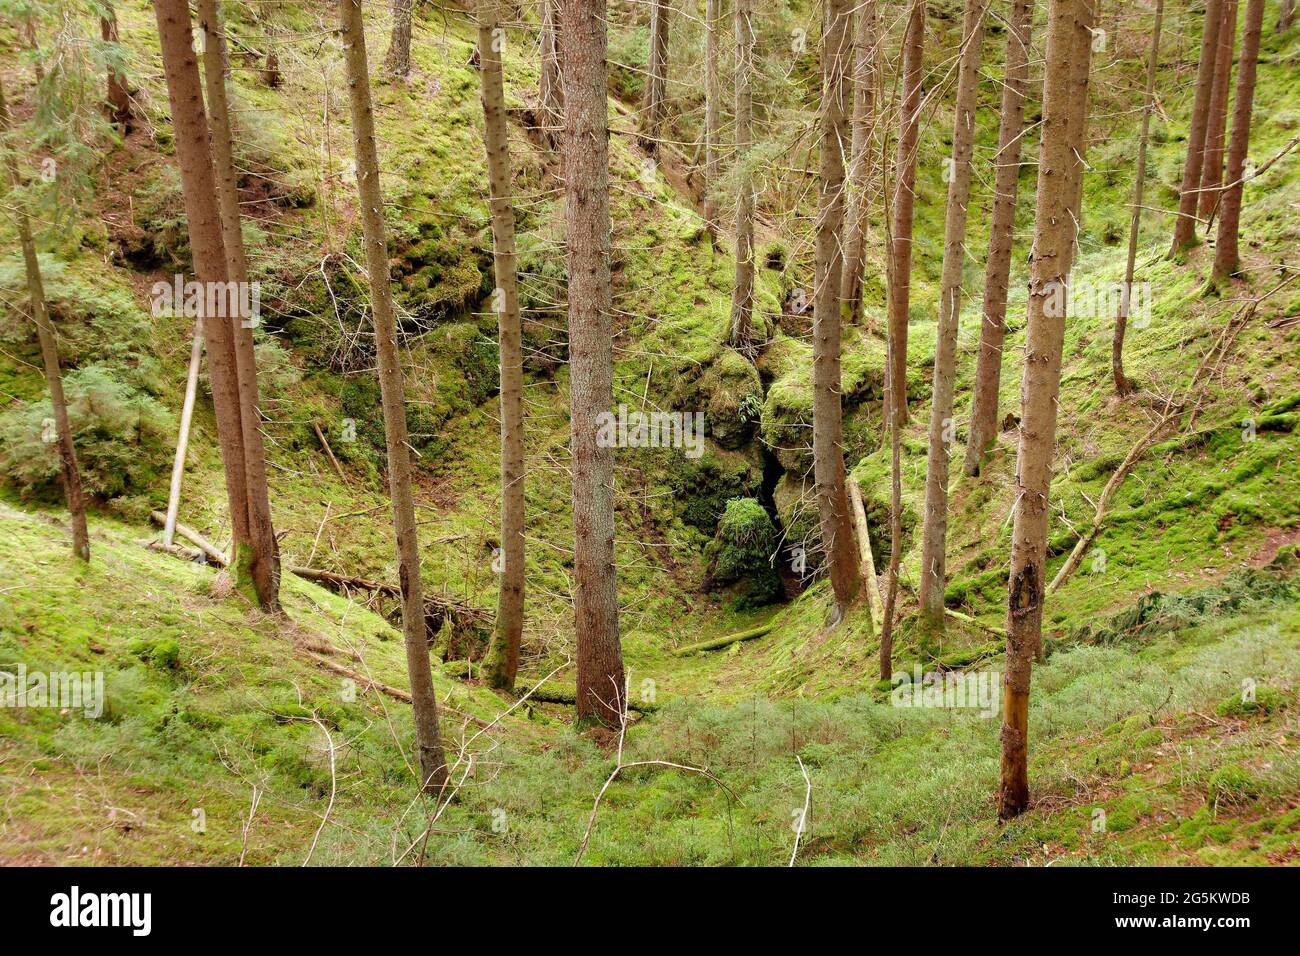 Doline, solution doline, collapse doline, morphological depression with dense vegetation of moss, European spruce (Picea abies) and spruce saplings, f Stock Photo